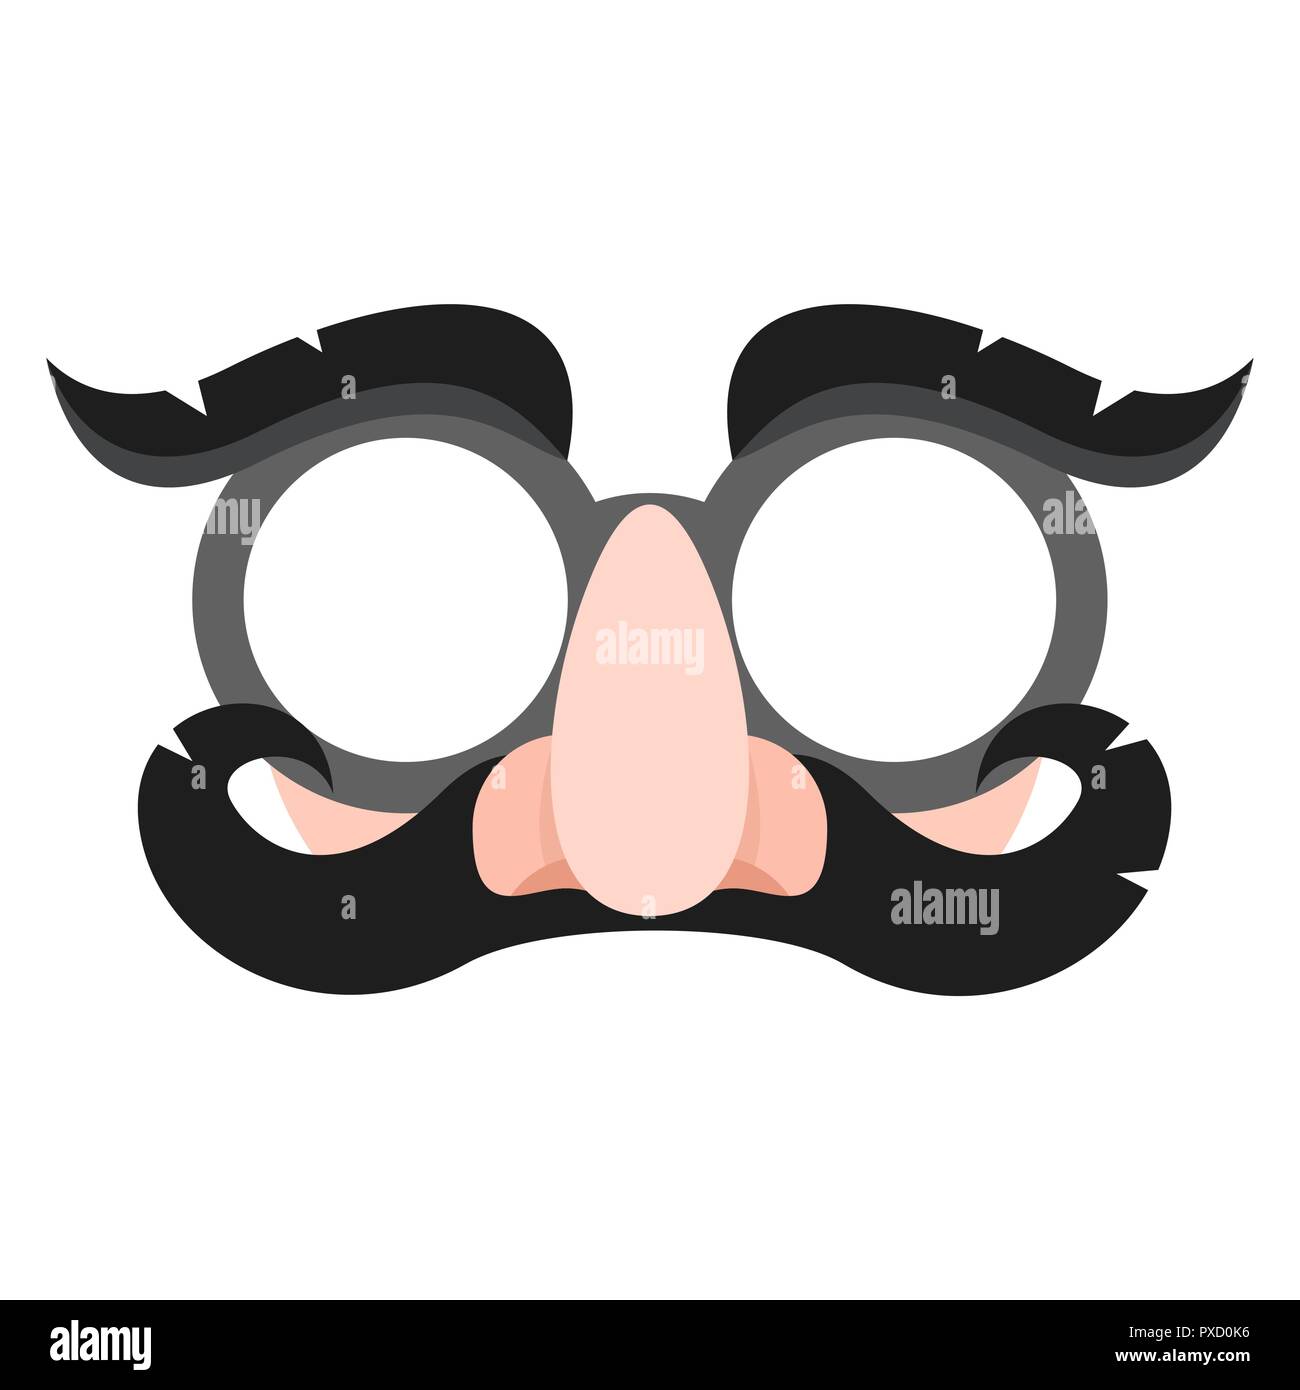 Mask of a man with mustache. Concept design Stock Vector